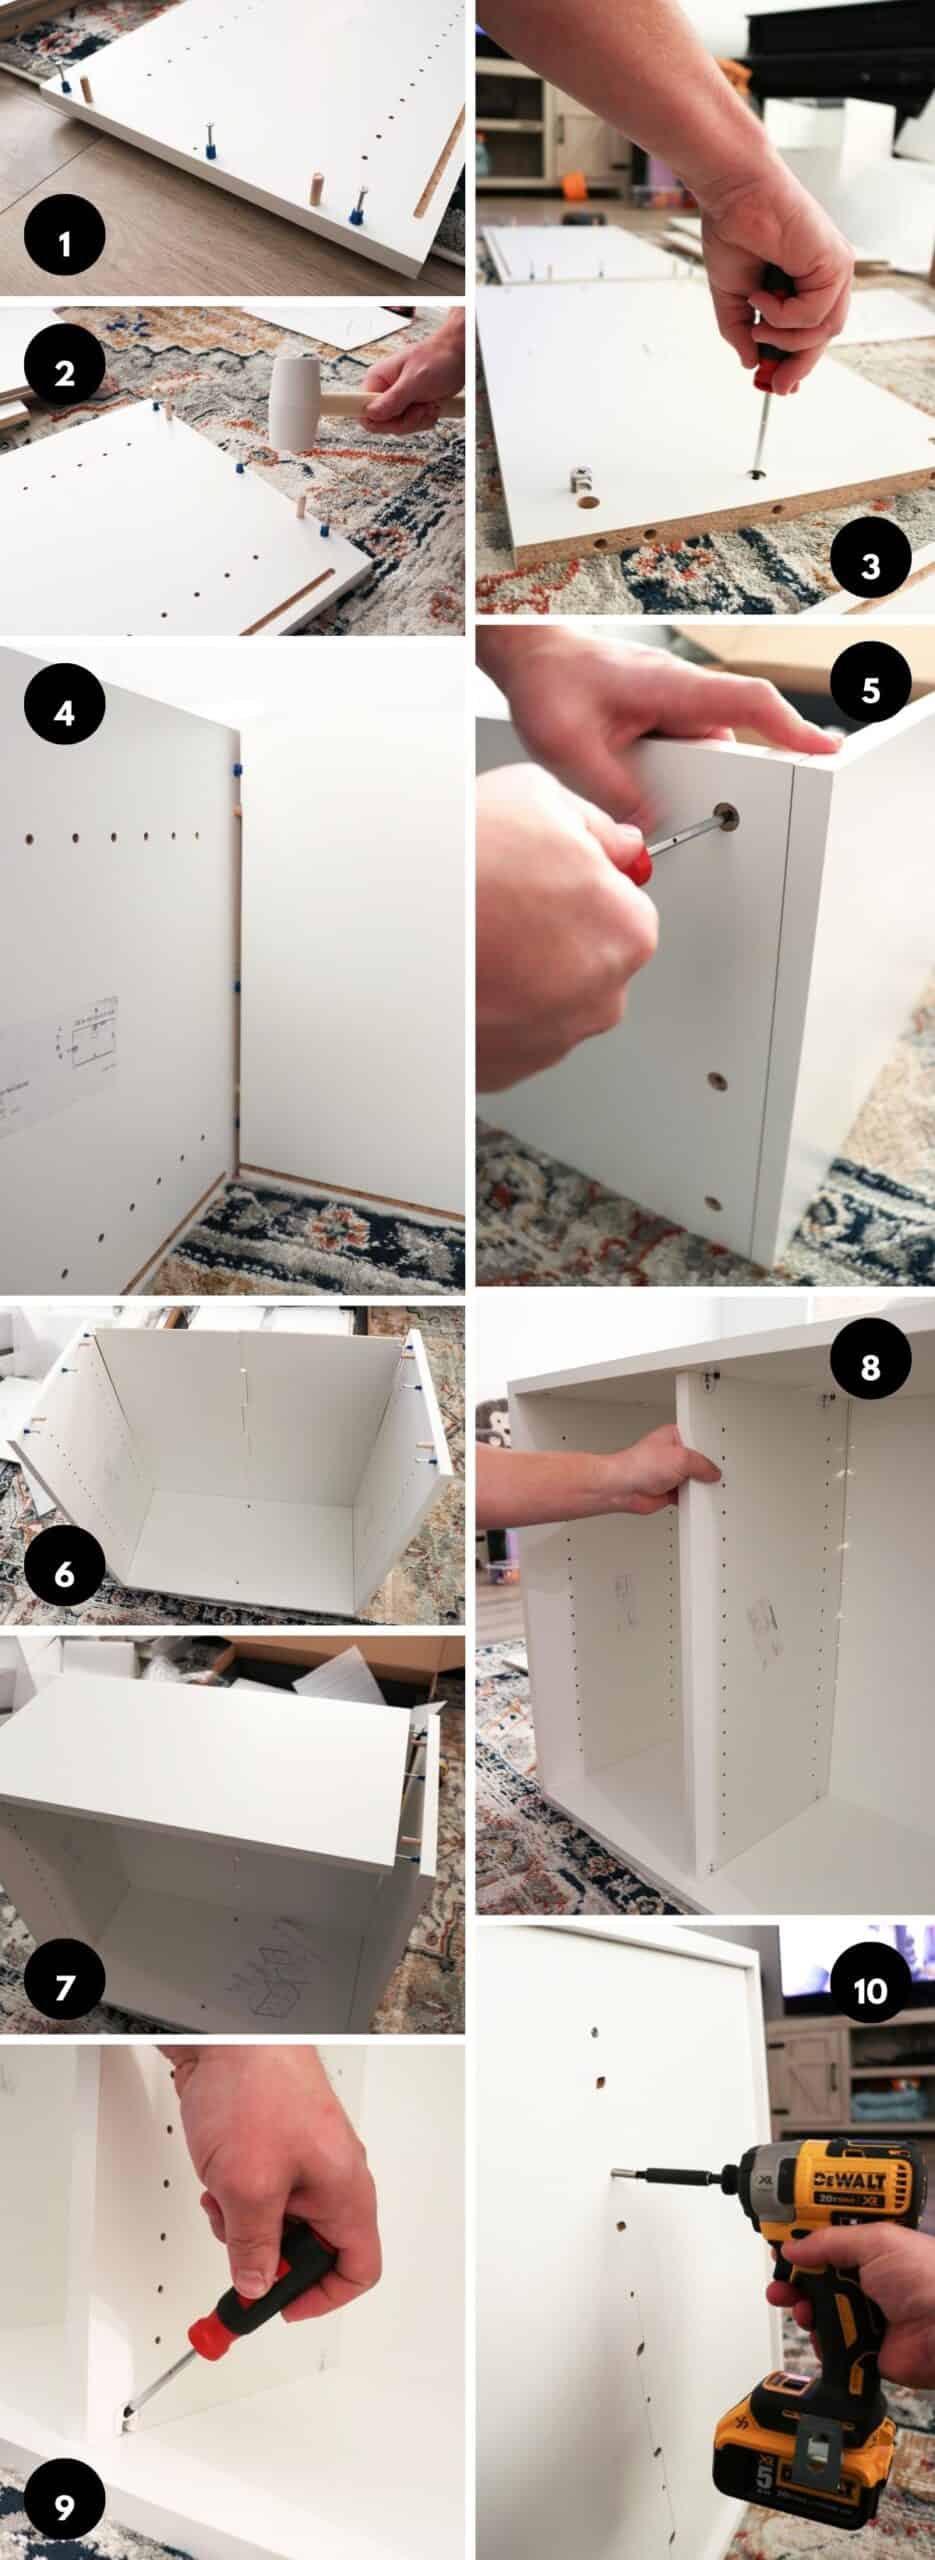 how to set up the Create Room Cubby instructions and Cubby reveal photos